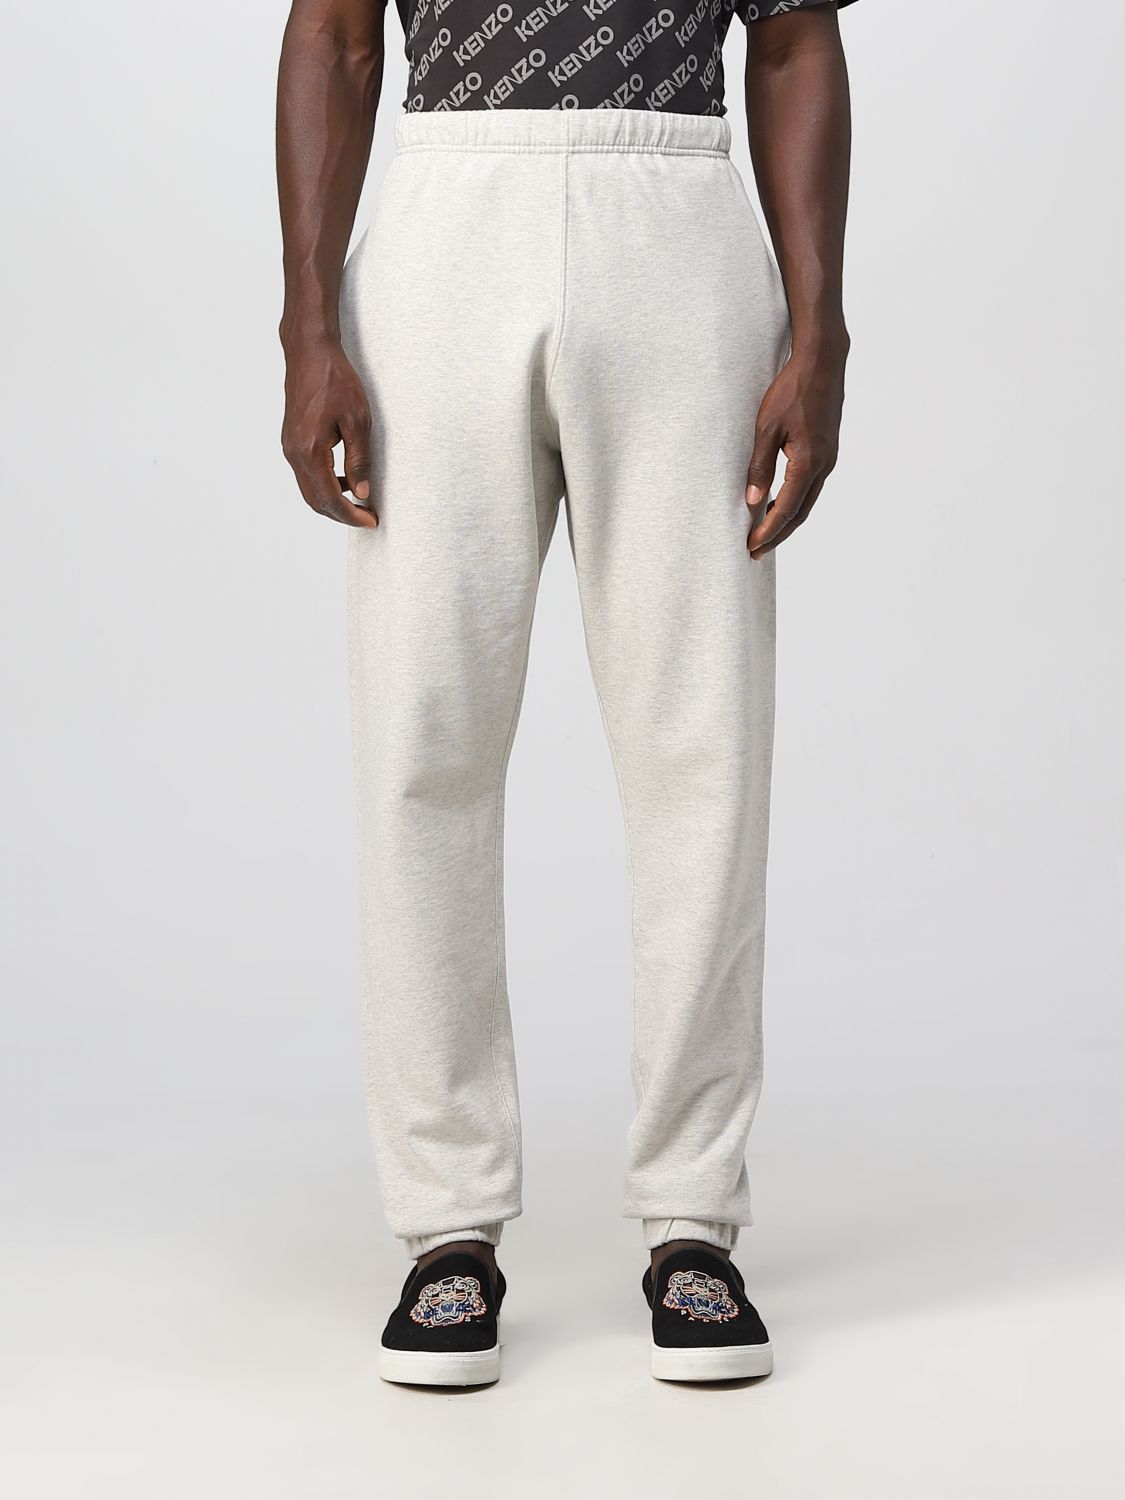 KENZO: pants for man - Grey | Kenzo pants FC65PA7934MF online at GIGLIO.COM